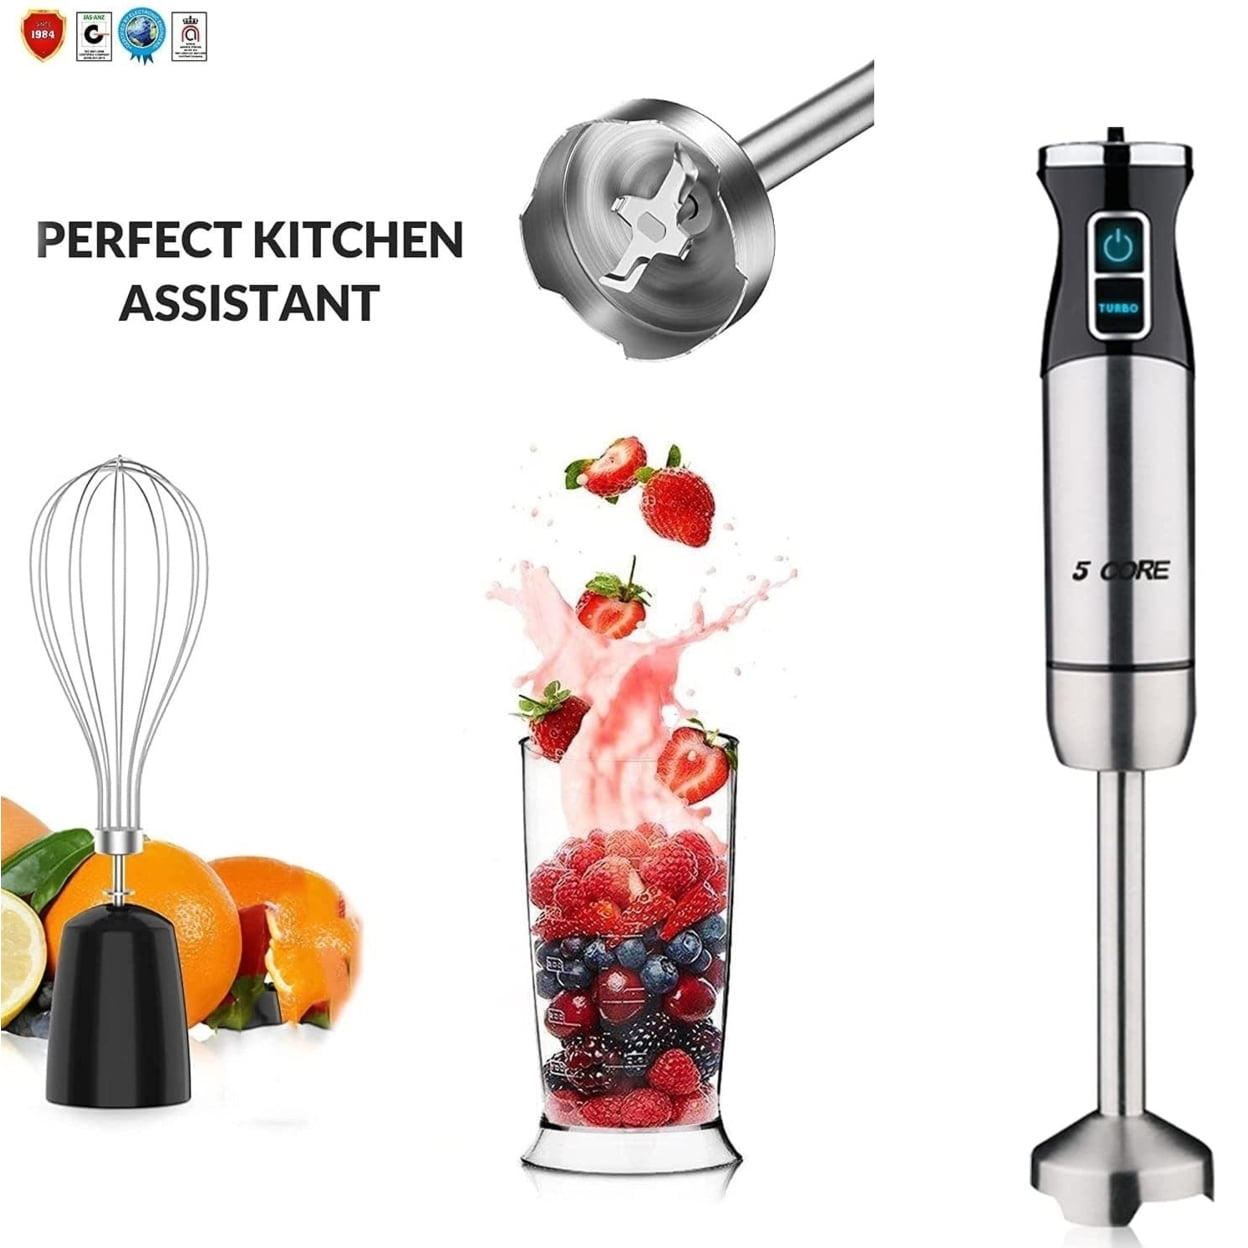 Dropship 5 Core Immersion Portable Hand Blender 5-In-1 500W Handheld 8  Variable Powerful Stainless Steel With Electric Whisker; 2-Blades 860ml  Food Processor; Chopper 600ml Mixing Beaker HB 1520 to Sell Online at